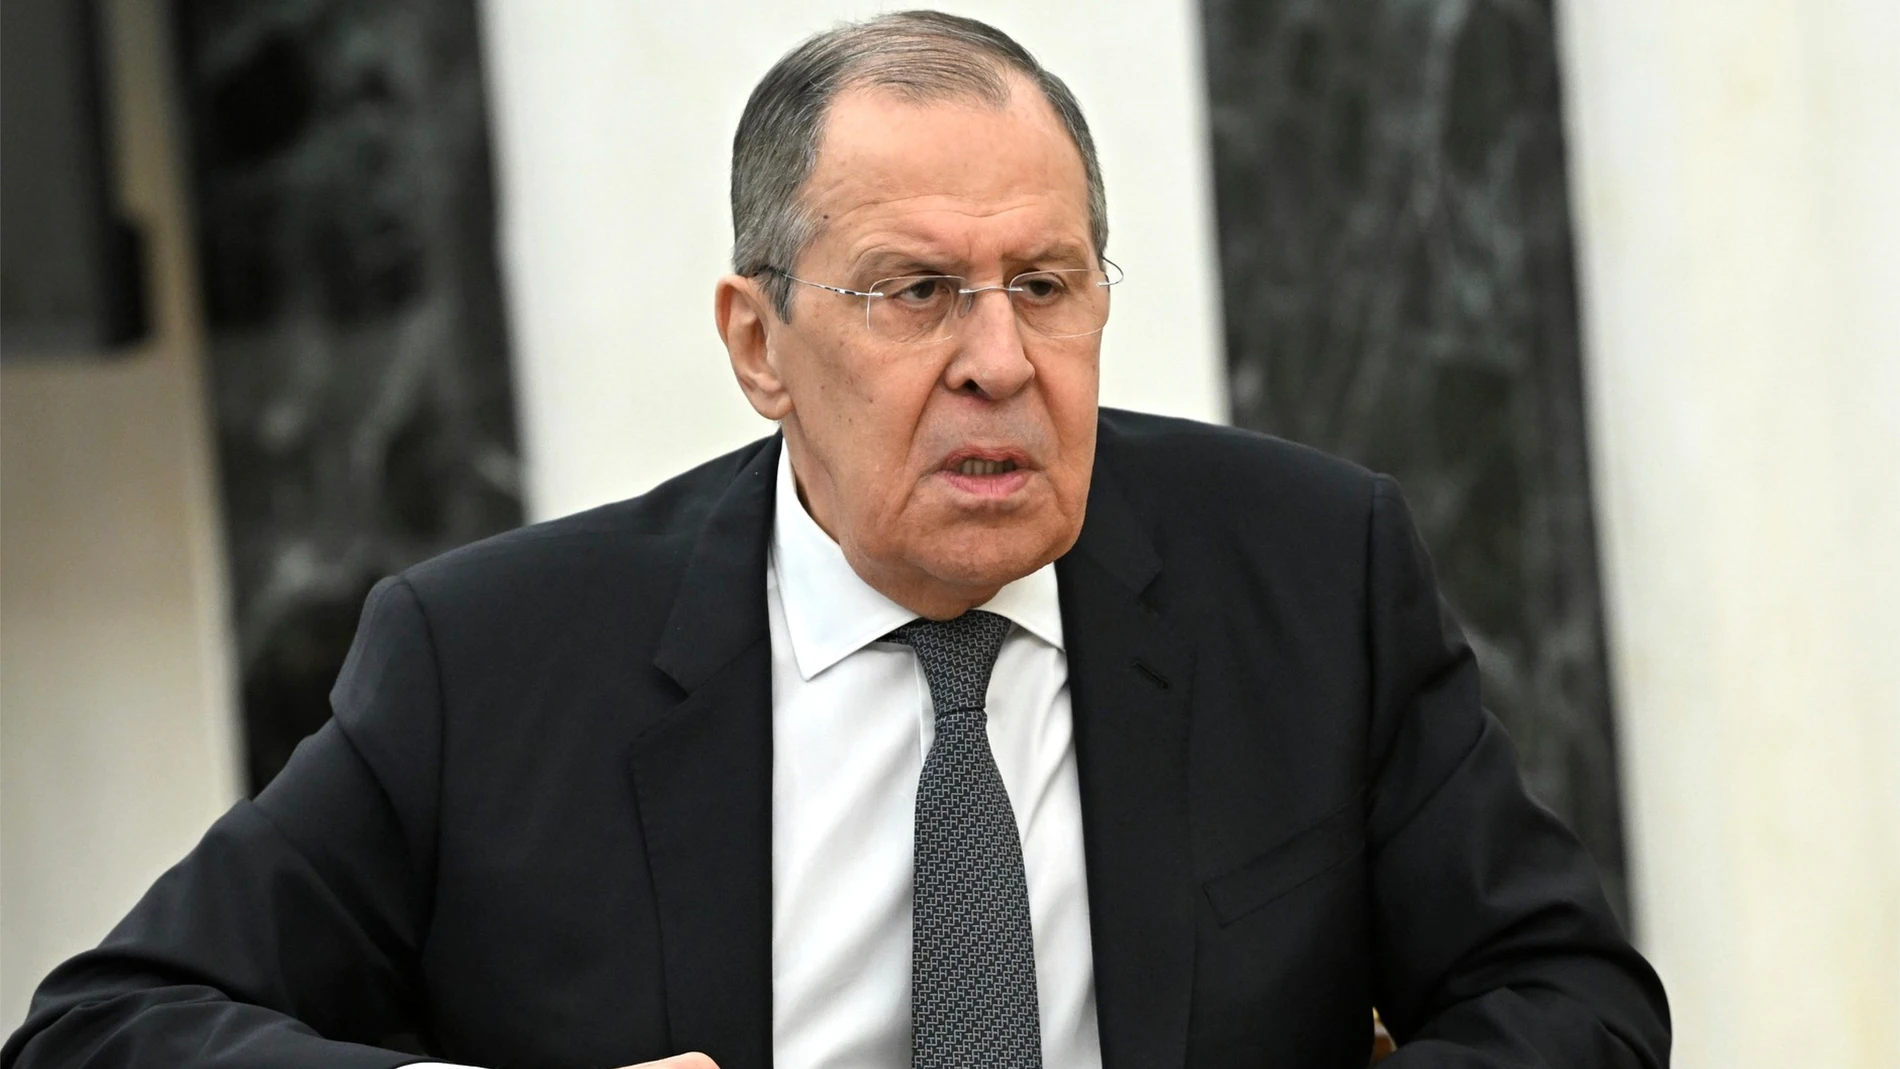 February 14, 2022, Moscow, Moscow Oblast, Russia: Russian Foreign Minister Sergey Lavrov during a face-to-face meeting with Russian President Vladimir Putin at the Kremlin, February 14, 2022 in Moscow, Russia. Lavrov recommended to continue talks with the west over Ukraine. (Foto de ARCHIVO) 14/02/2022